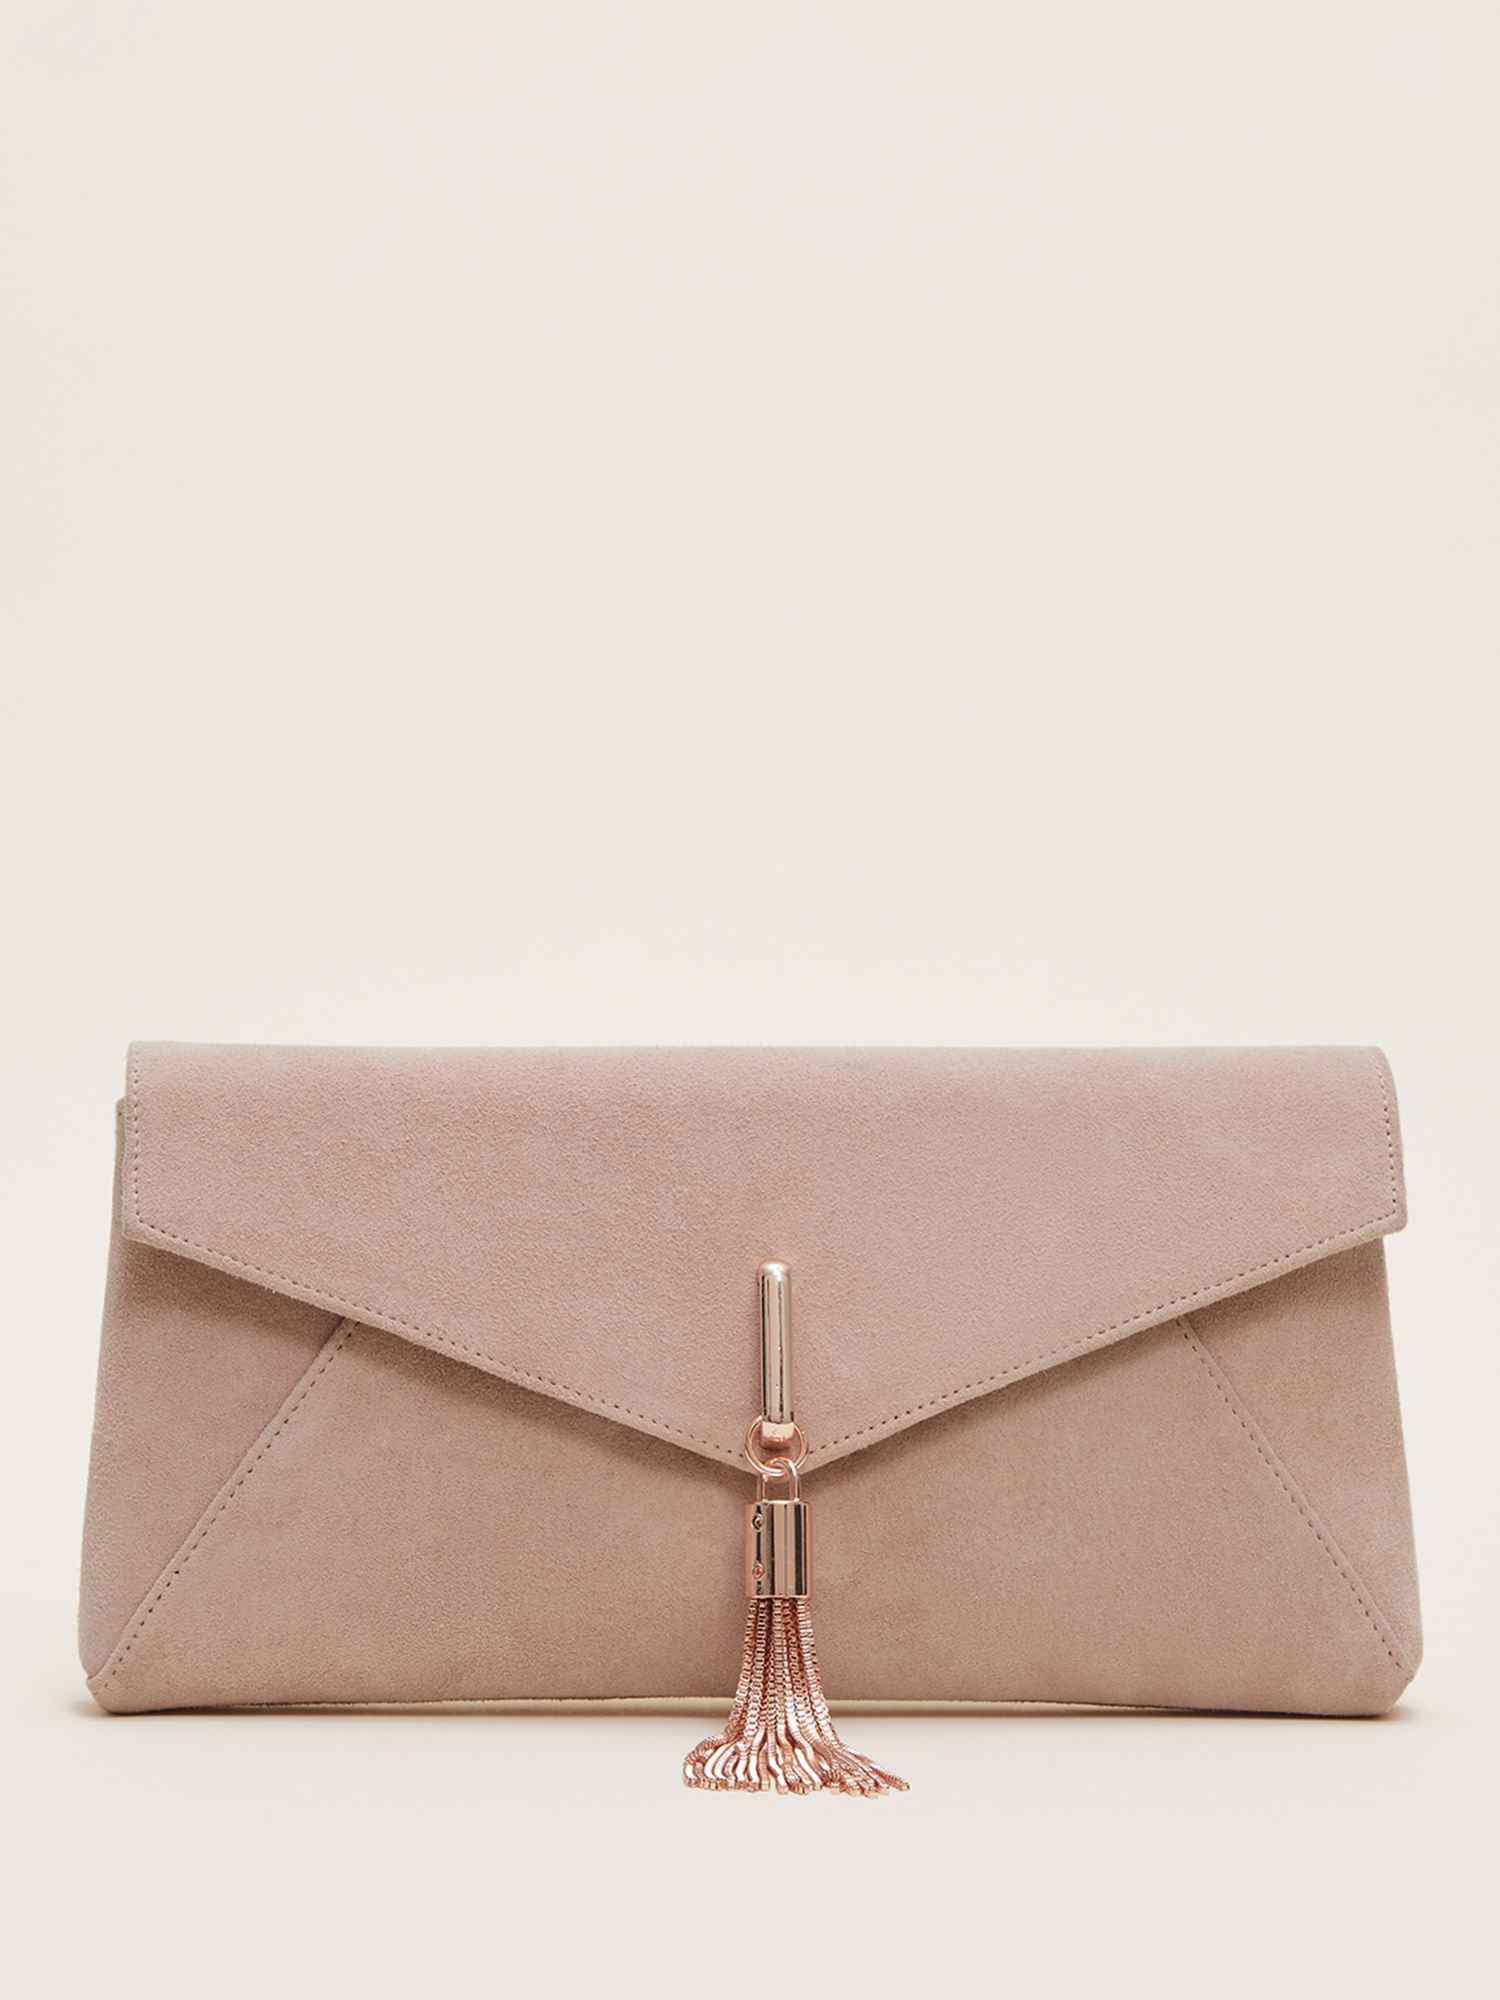 Phase Eight Suede Tassel Trim Clutch Bag, Cameo at John Lewis & Partners